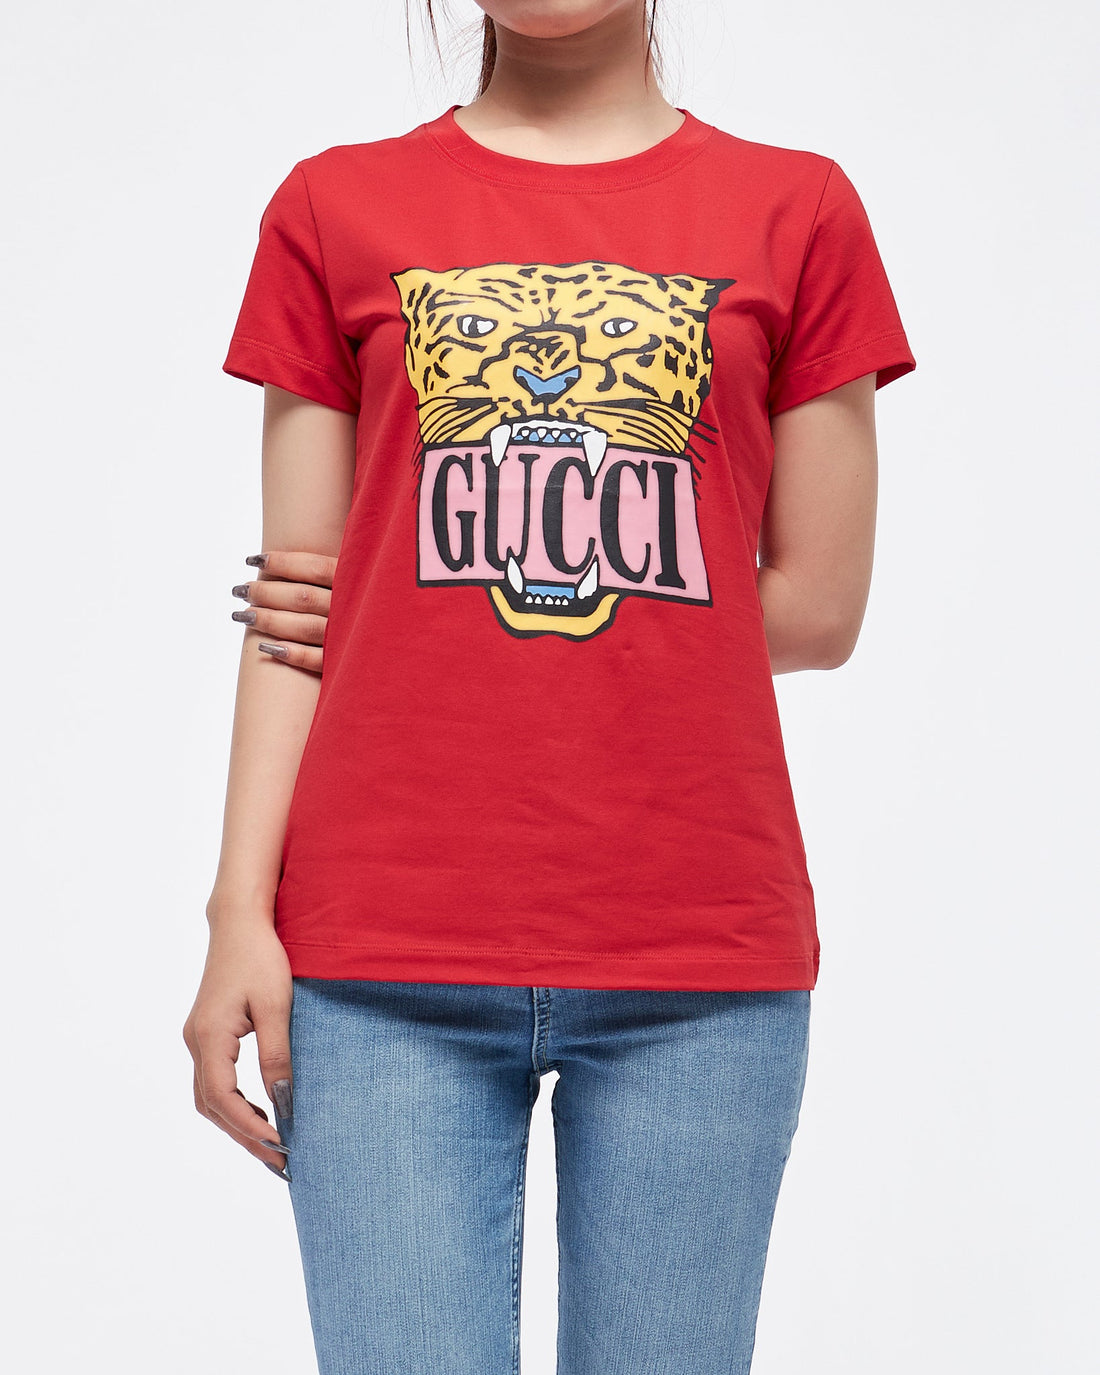 MOI OUTFIT-Tiger Logo Printed Lady T-Shirt 14.50